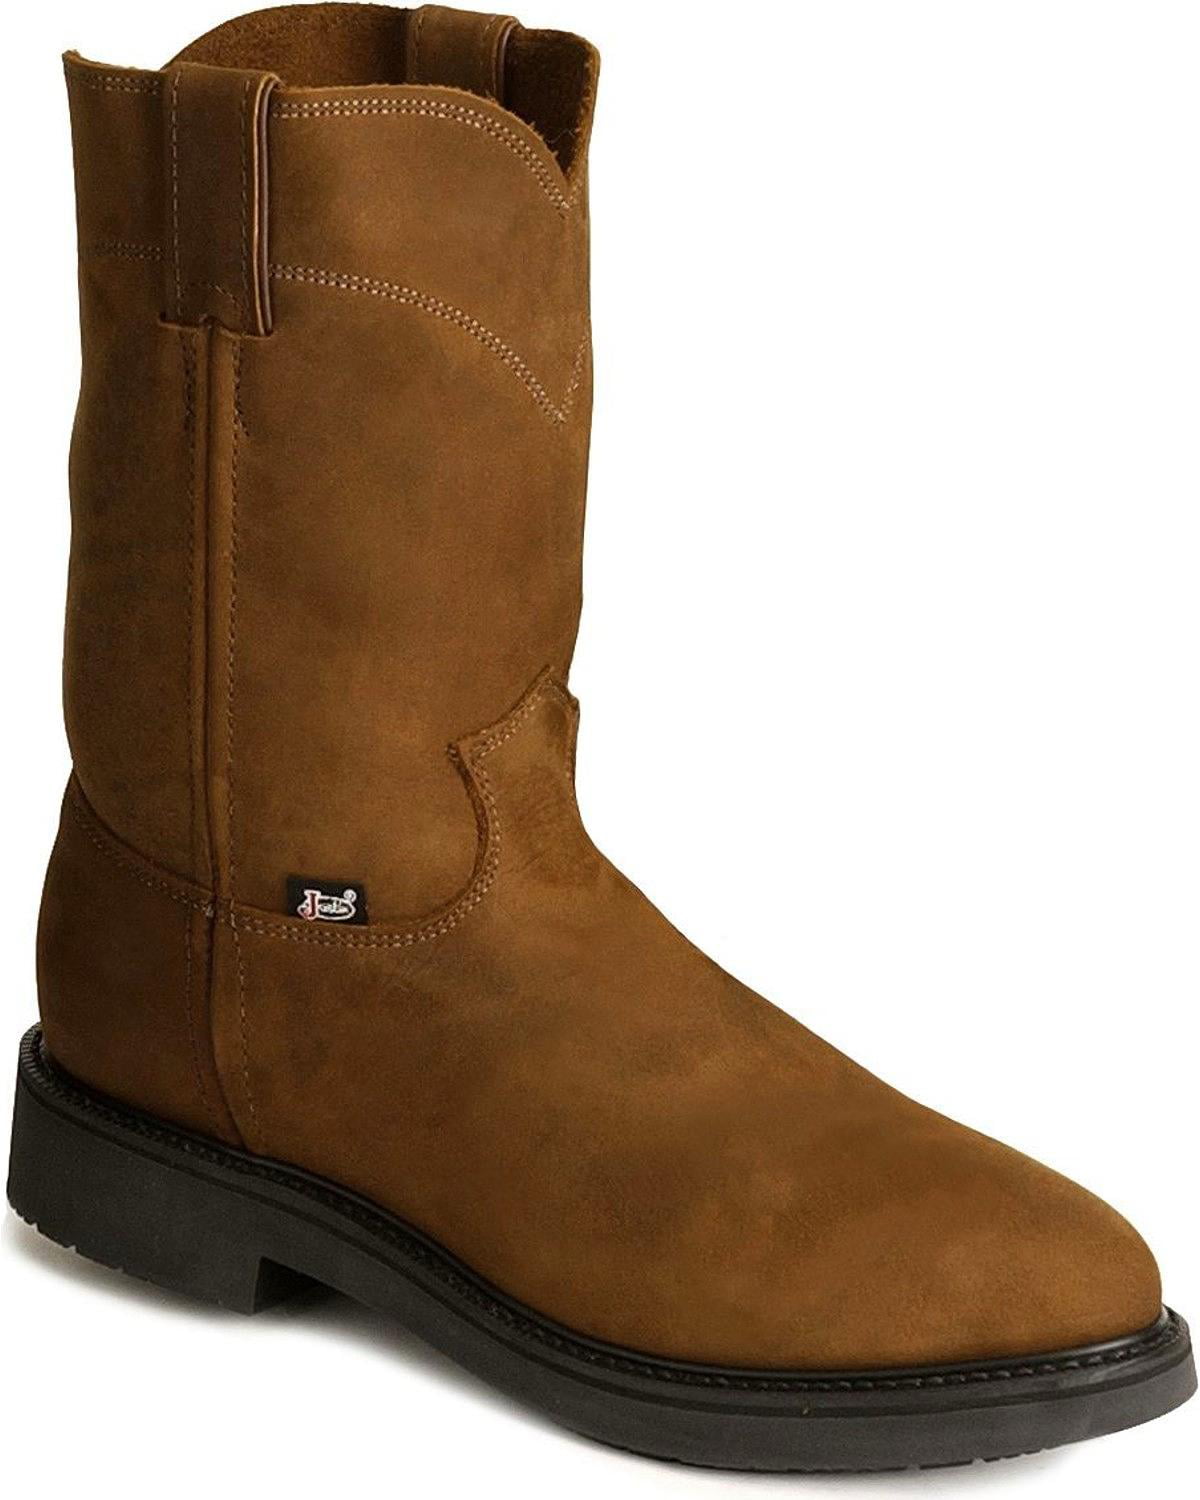 justin double comfort work boots